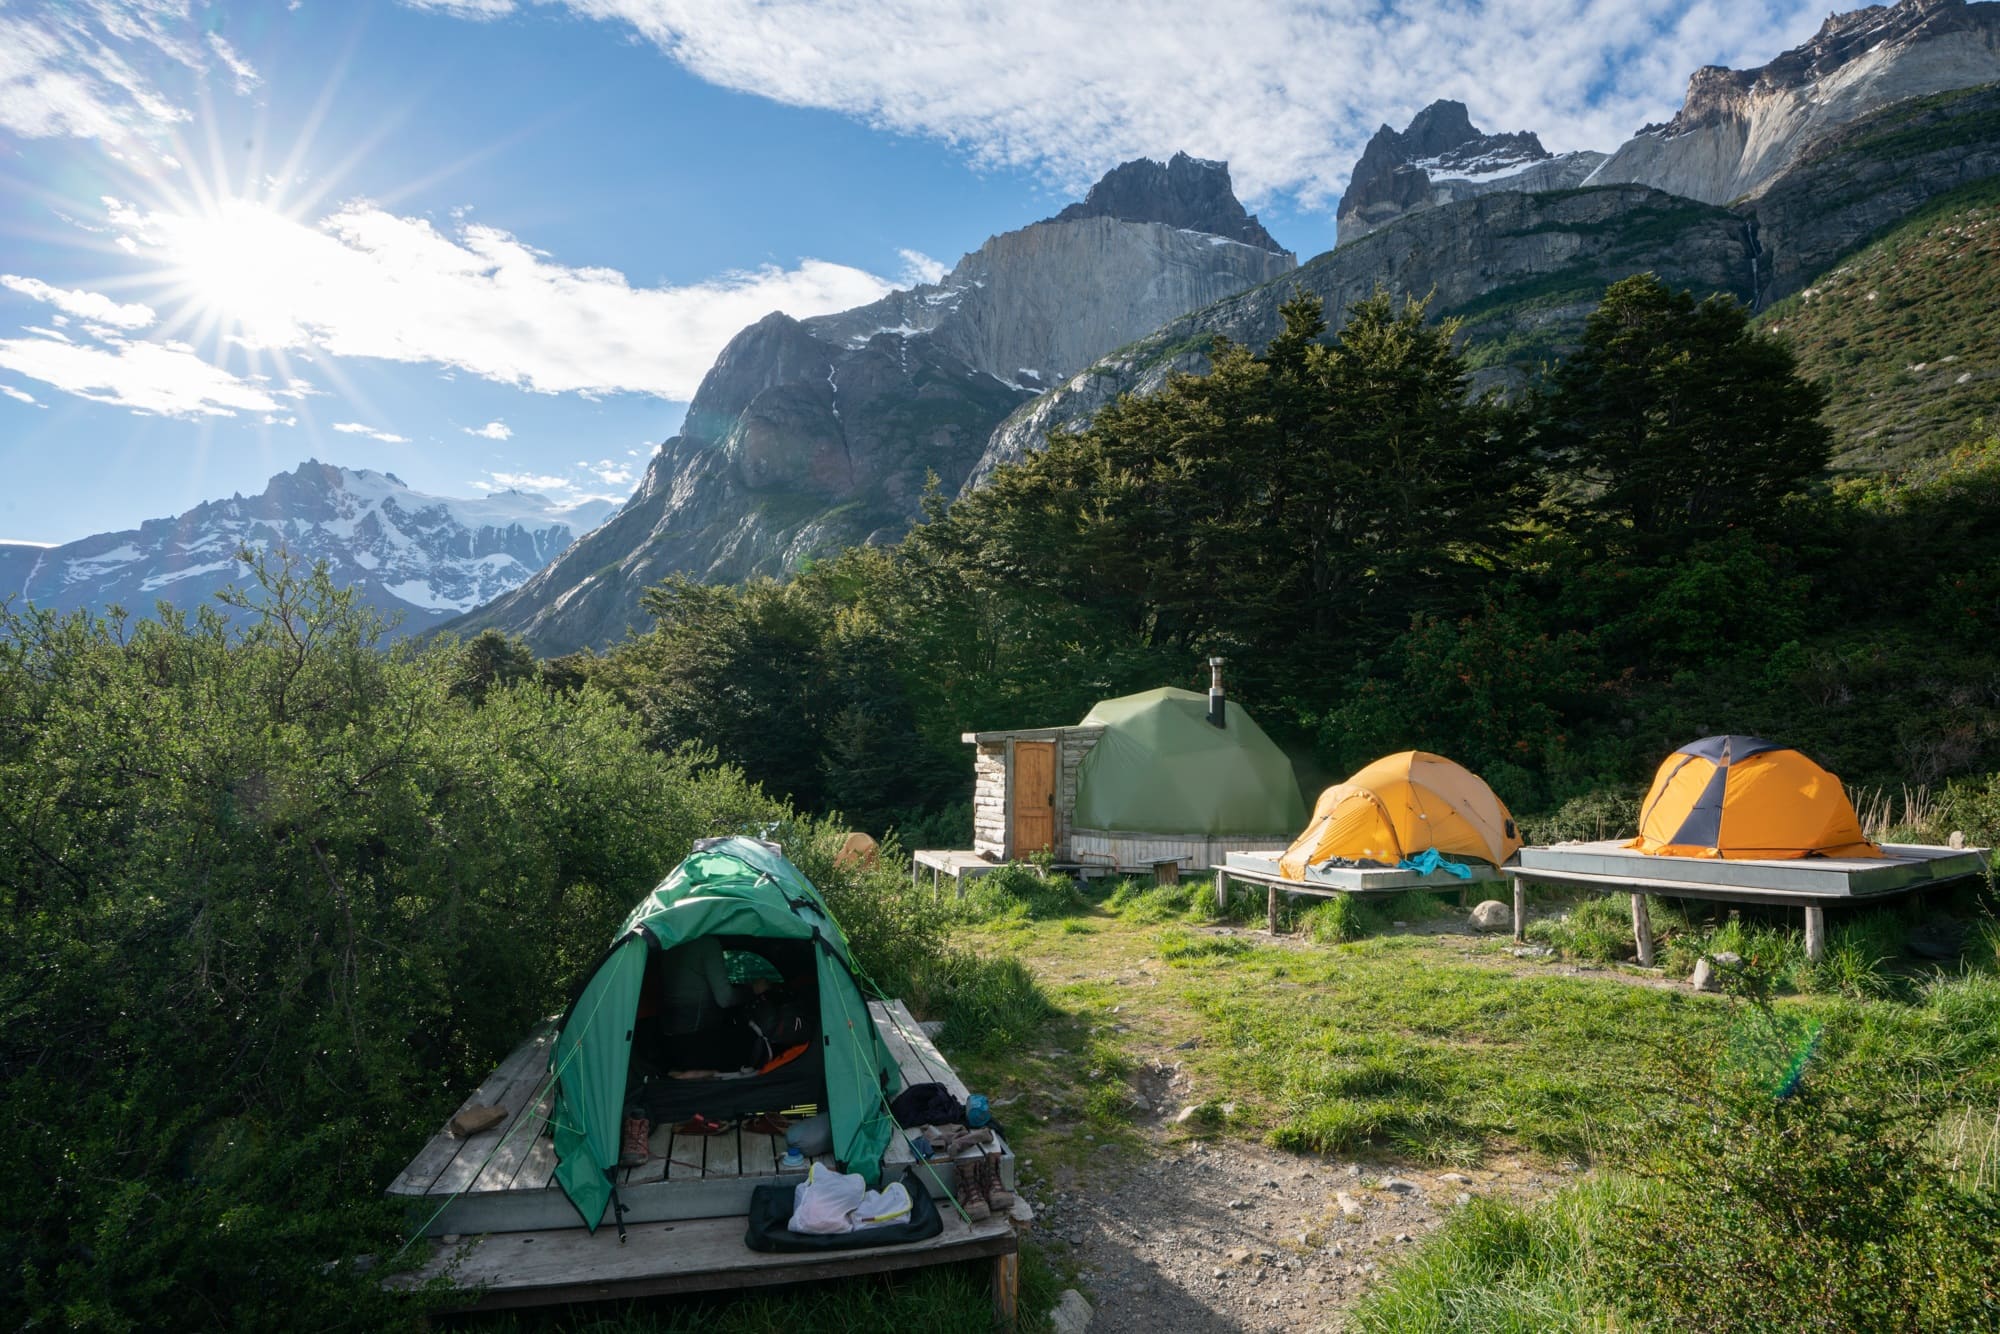 Want to hike the W Trek in Torres Del Paine? Use our guide to plan this bucket-list trail in Patagonia complete with itinerary, gear, and campsite tips.